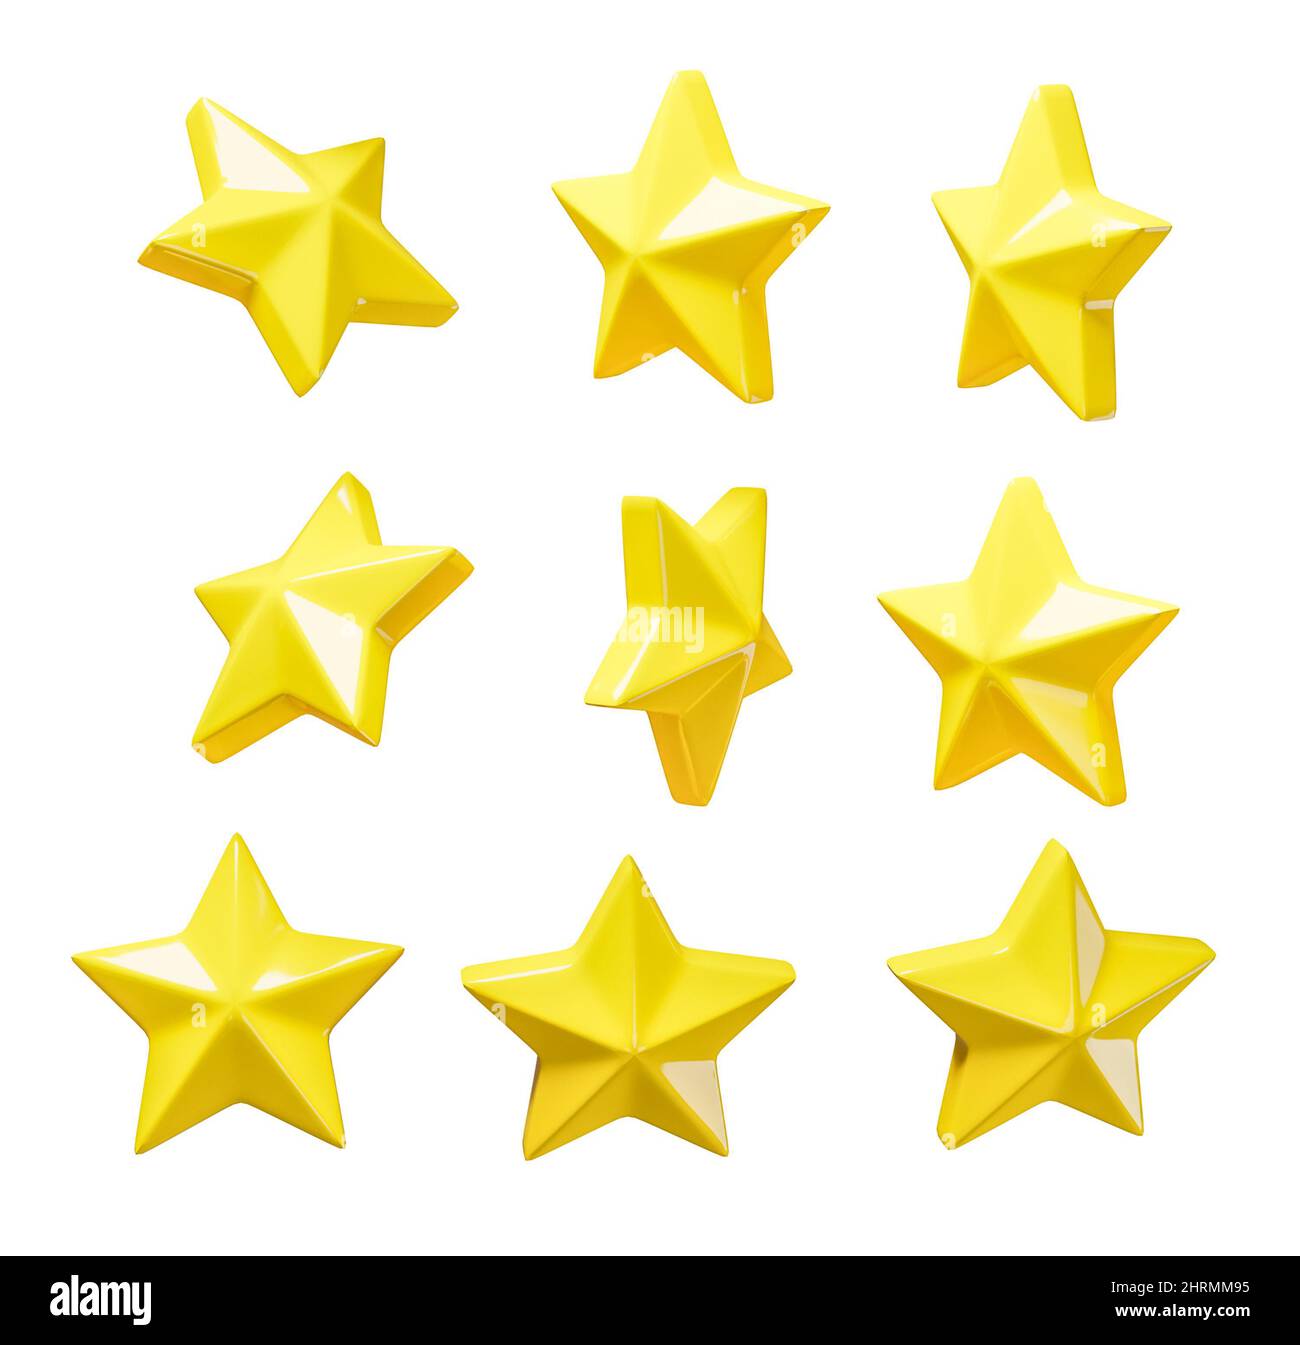 Set of yellow stars isolated on a white background. 3d render. Stock Photo